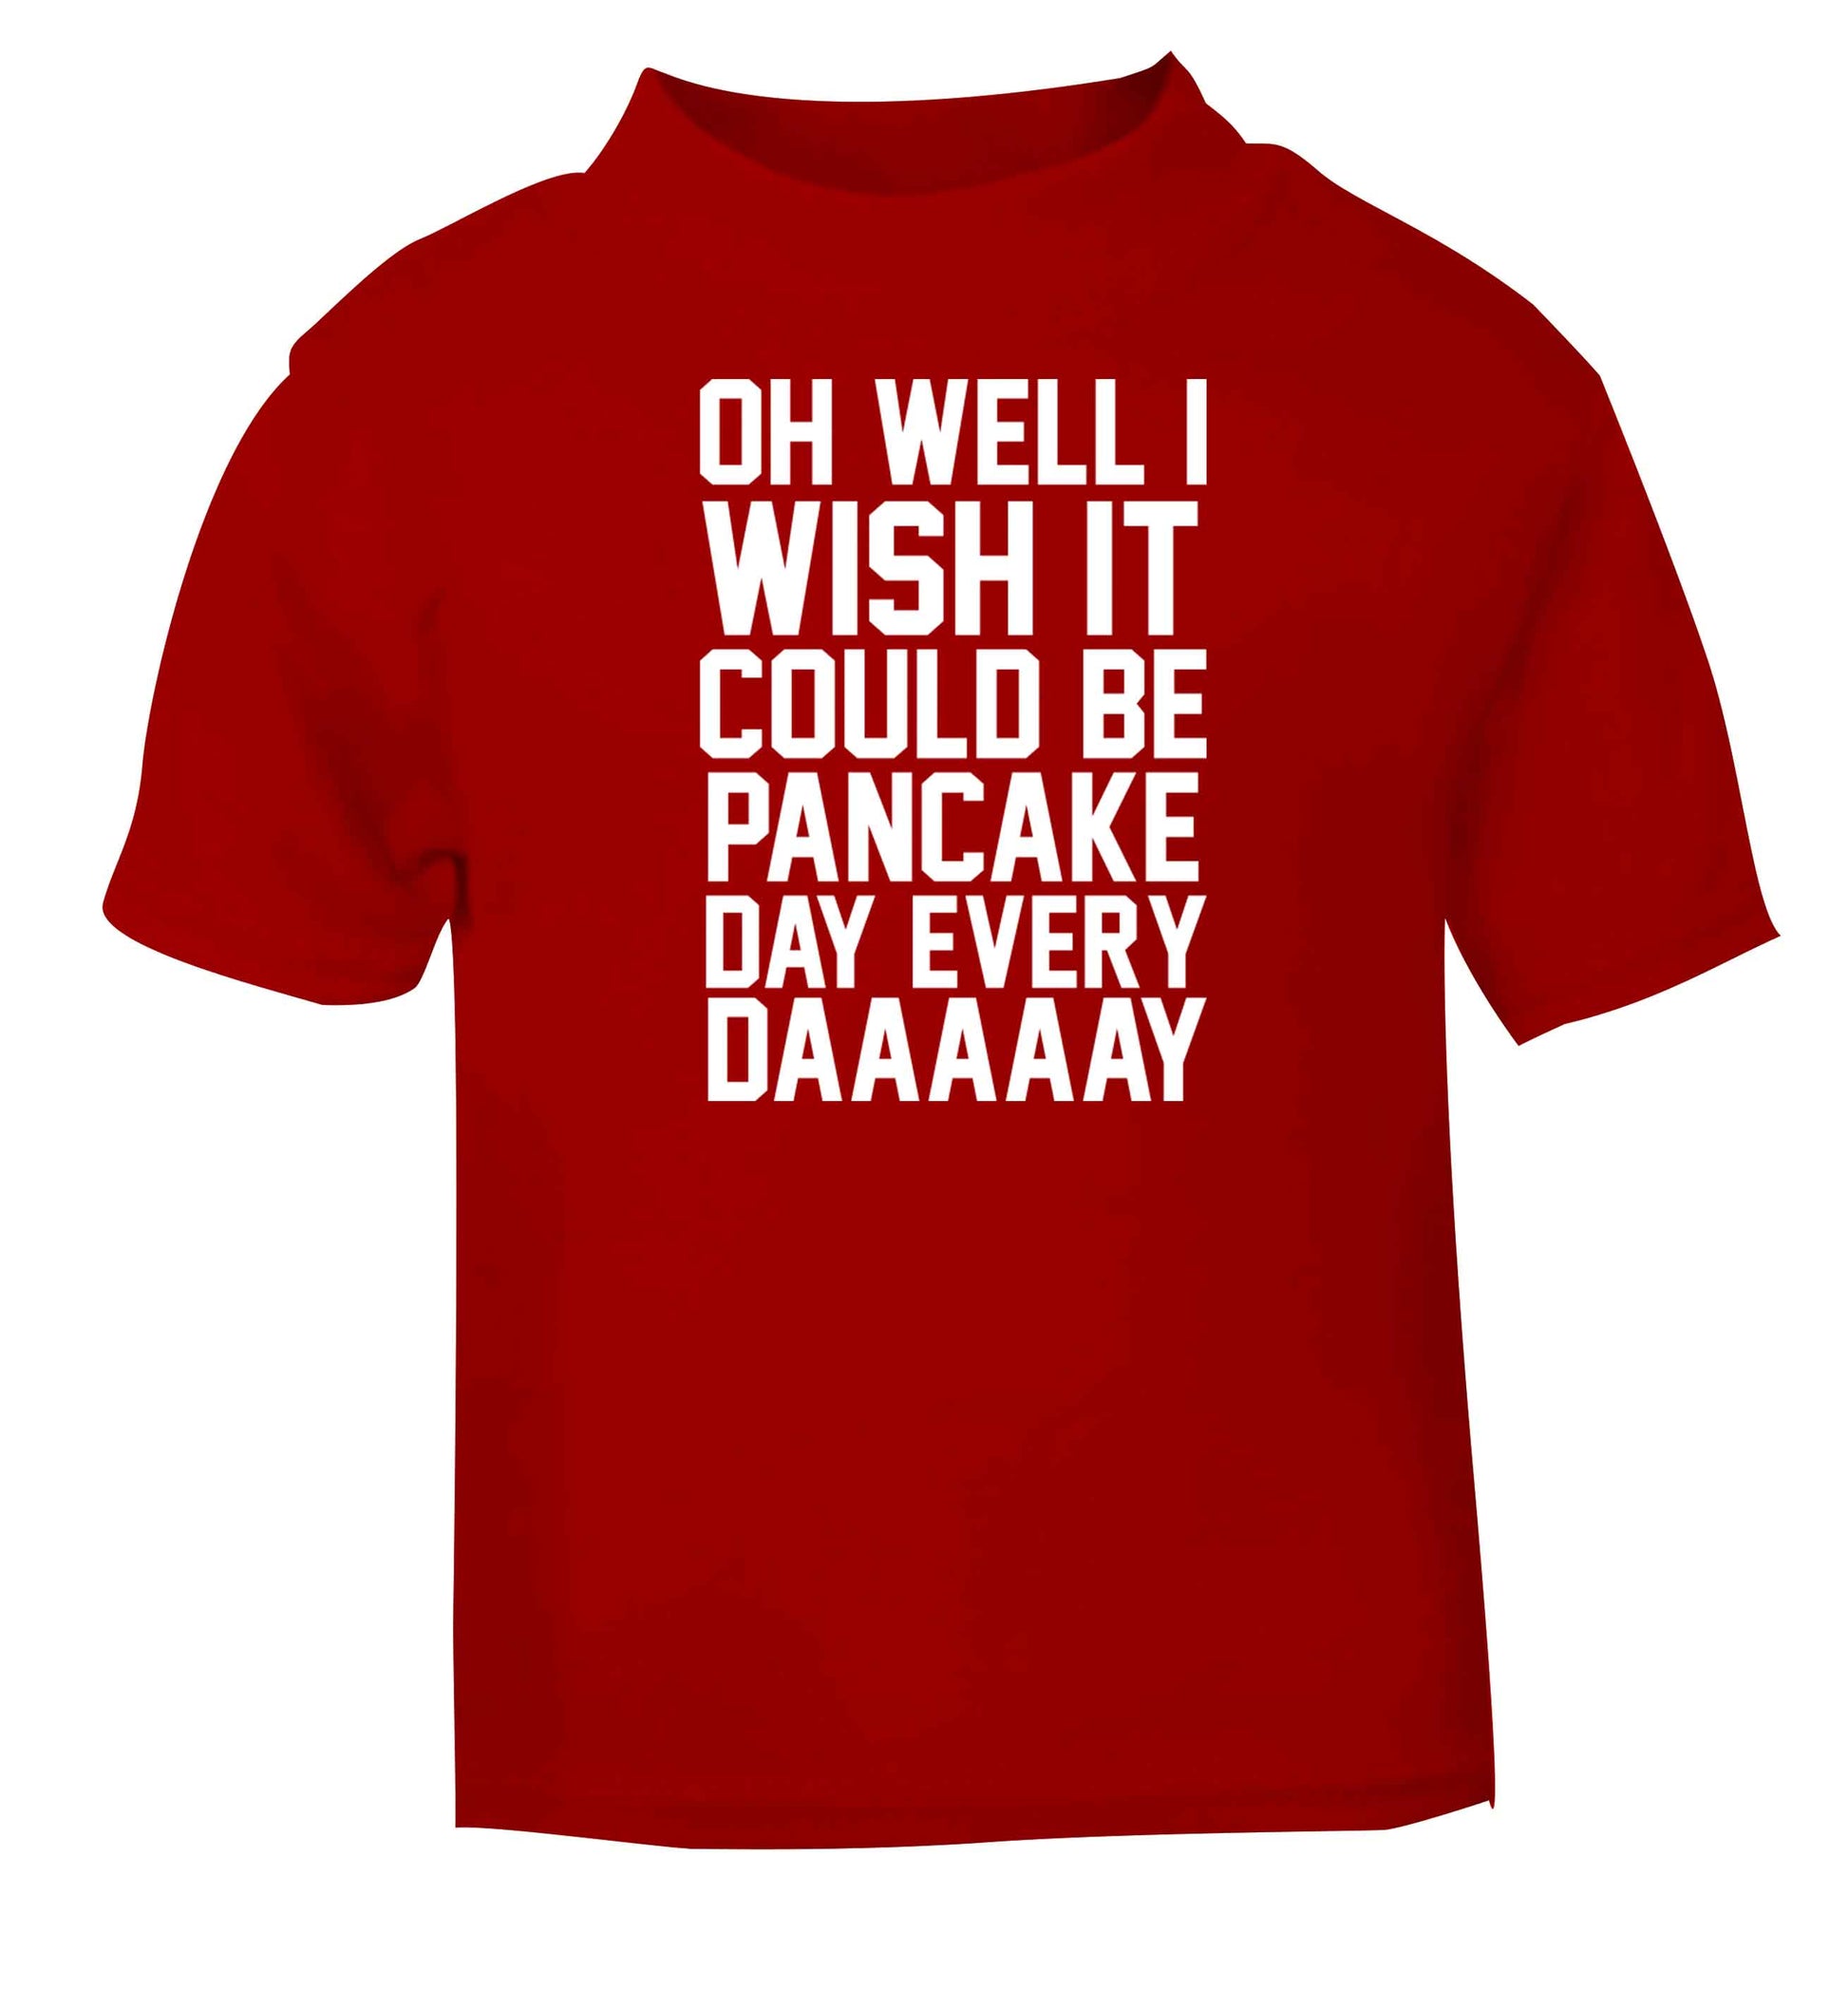 Oh well I wish it could be pancake day every day red baby toddler Tshirt 2 Years